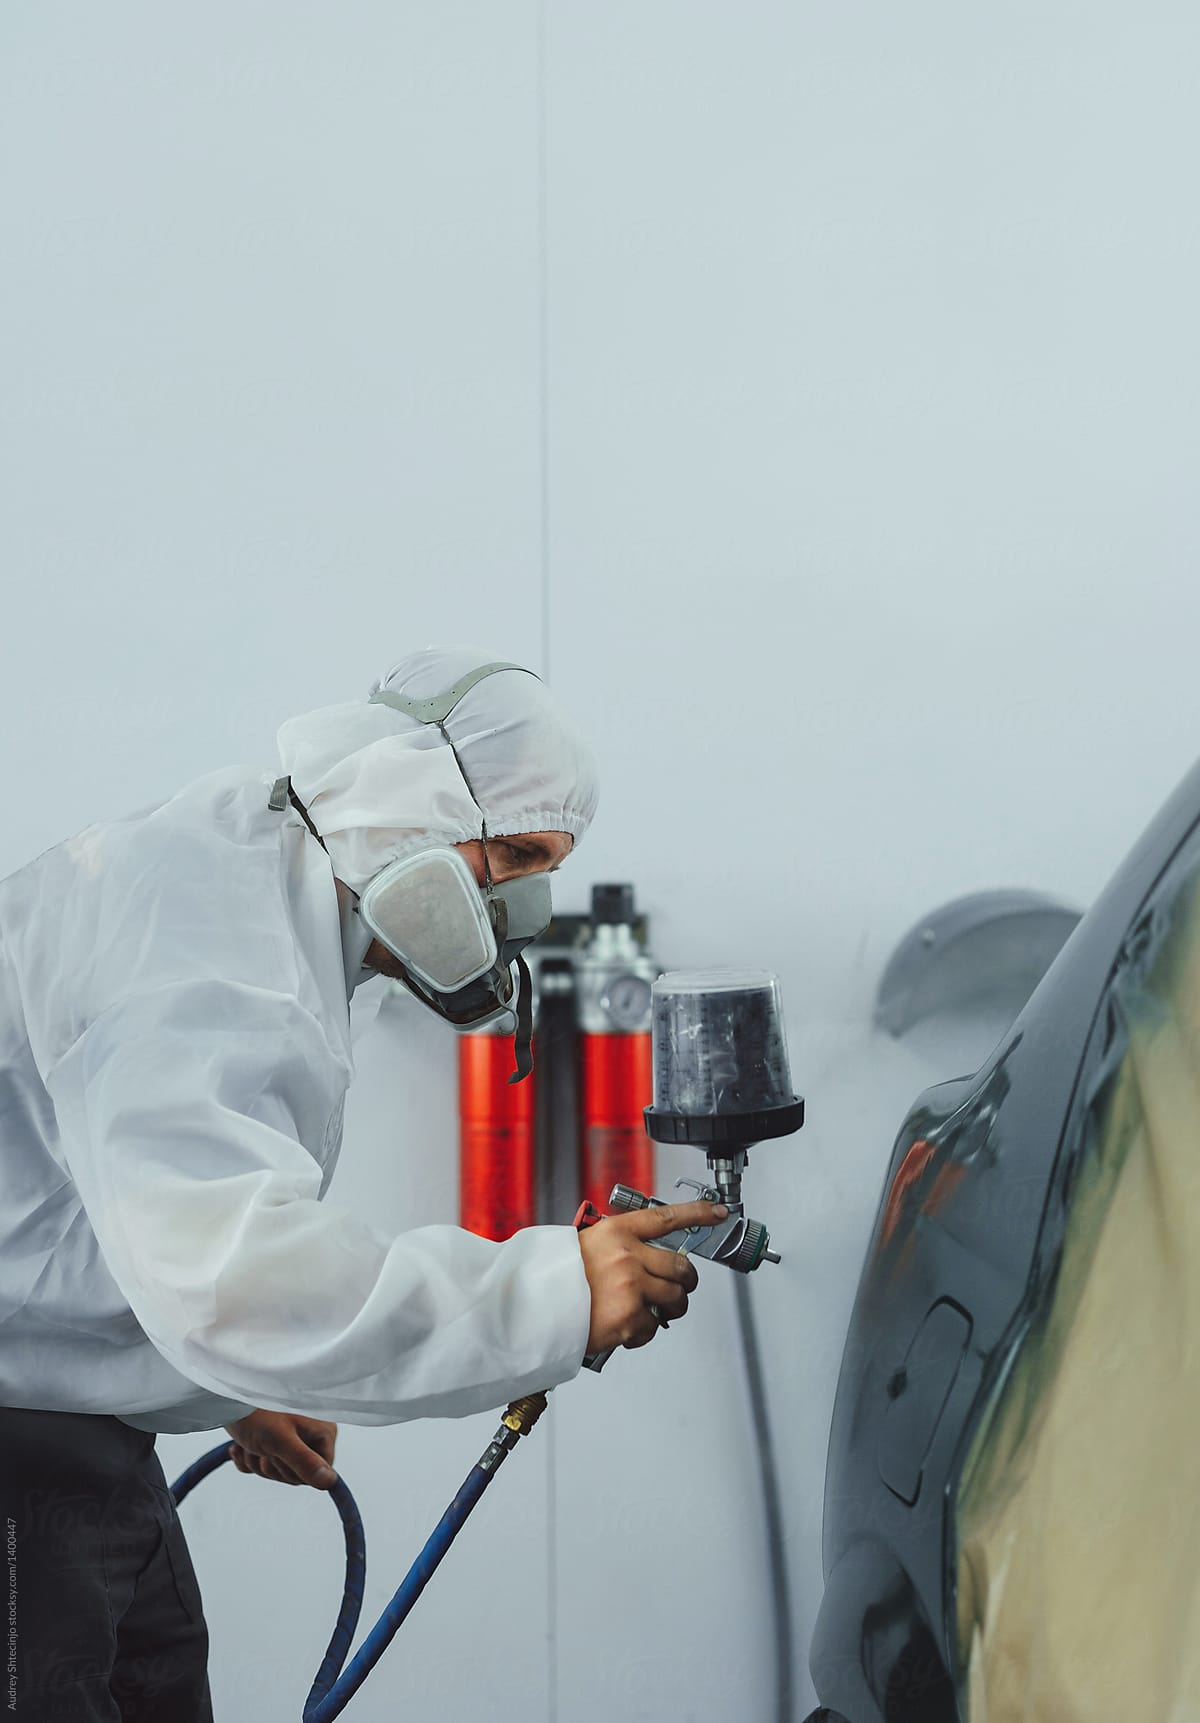 Worker/painter working on car bodywork in paint chamber/workshop.